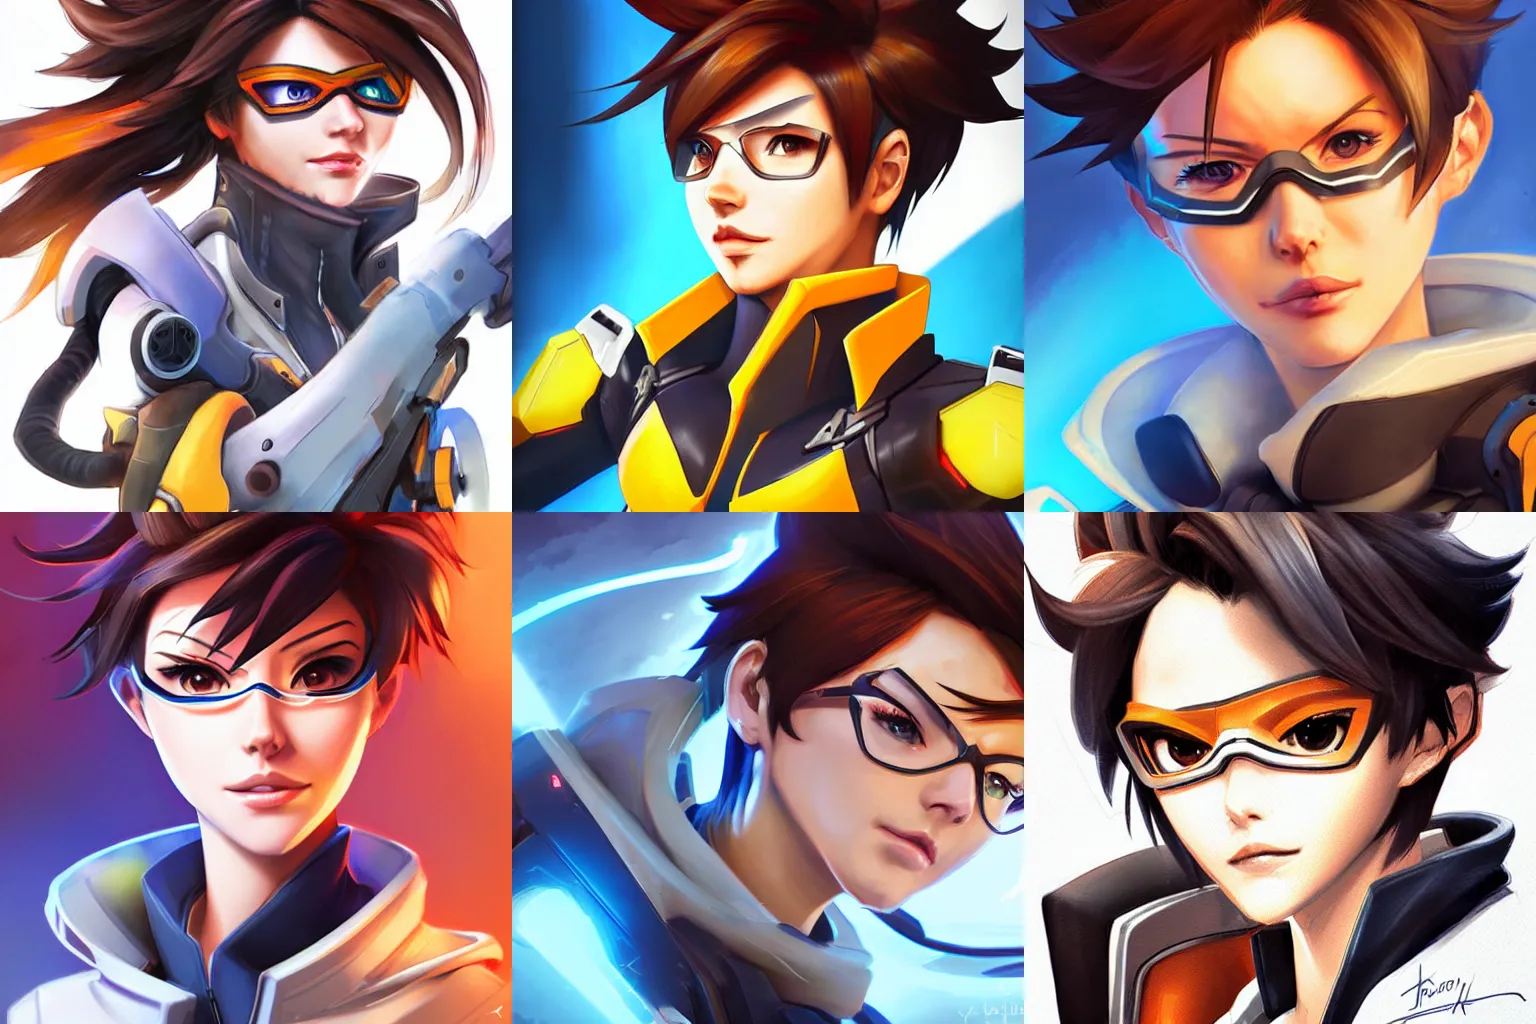 KREA - portrait of Tracer from Overwatch, centered, face forwards,  professional, digital art, 2d, stylized, beautiful, colorful, clean and  simple, warm lighting, Krita, Artstation, Pinterest